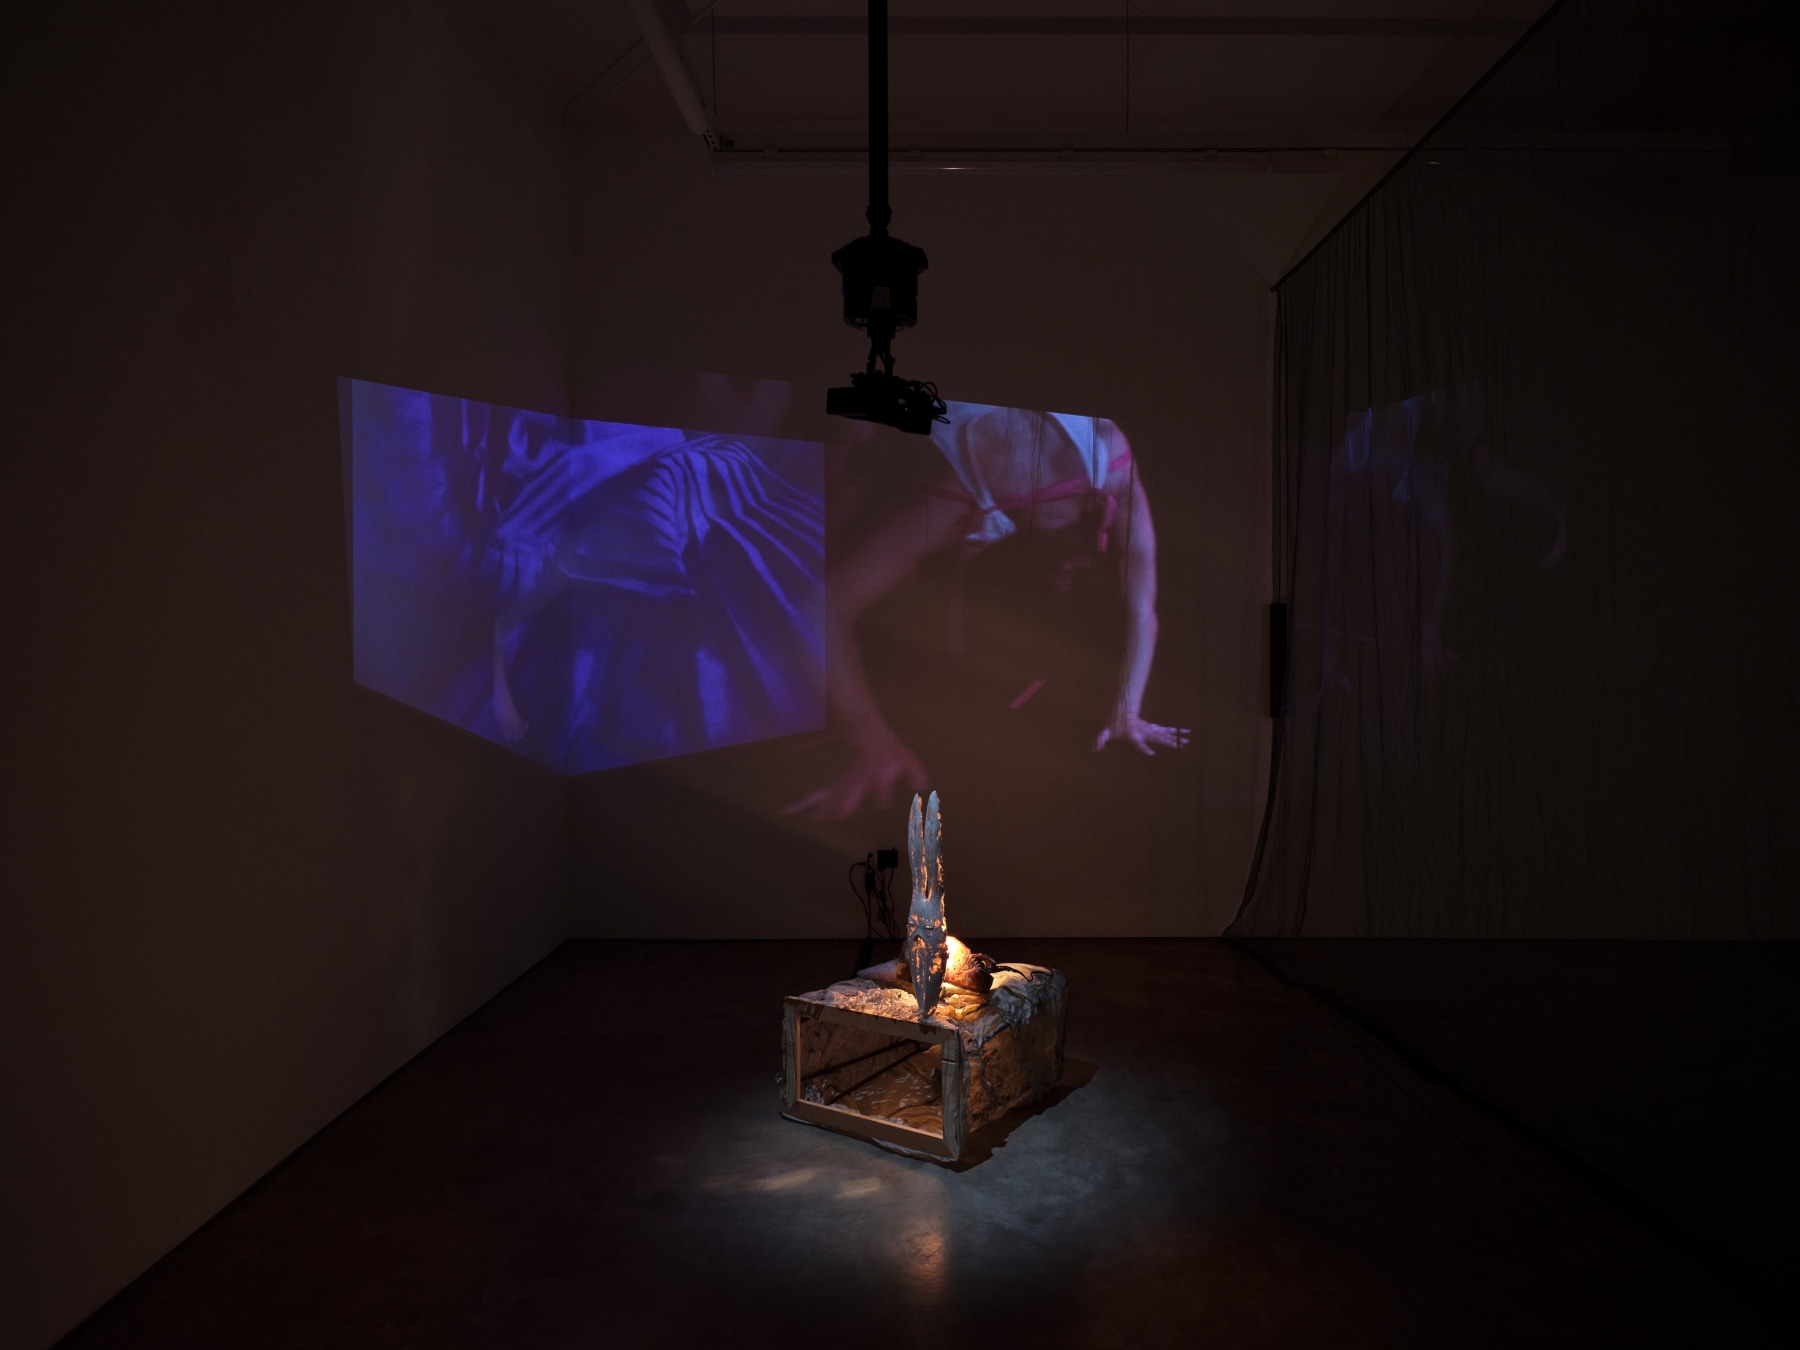 Catalina Ouyang, forgive everything, installation view, 2022